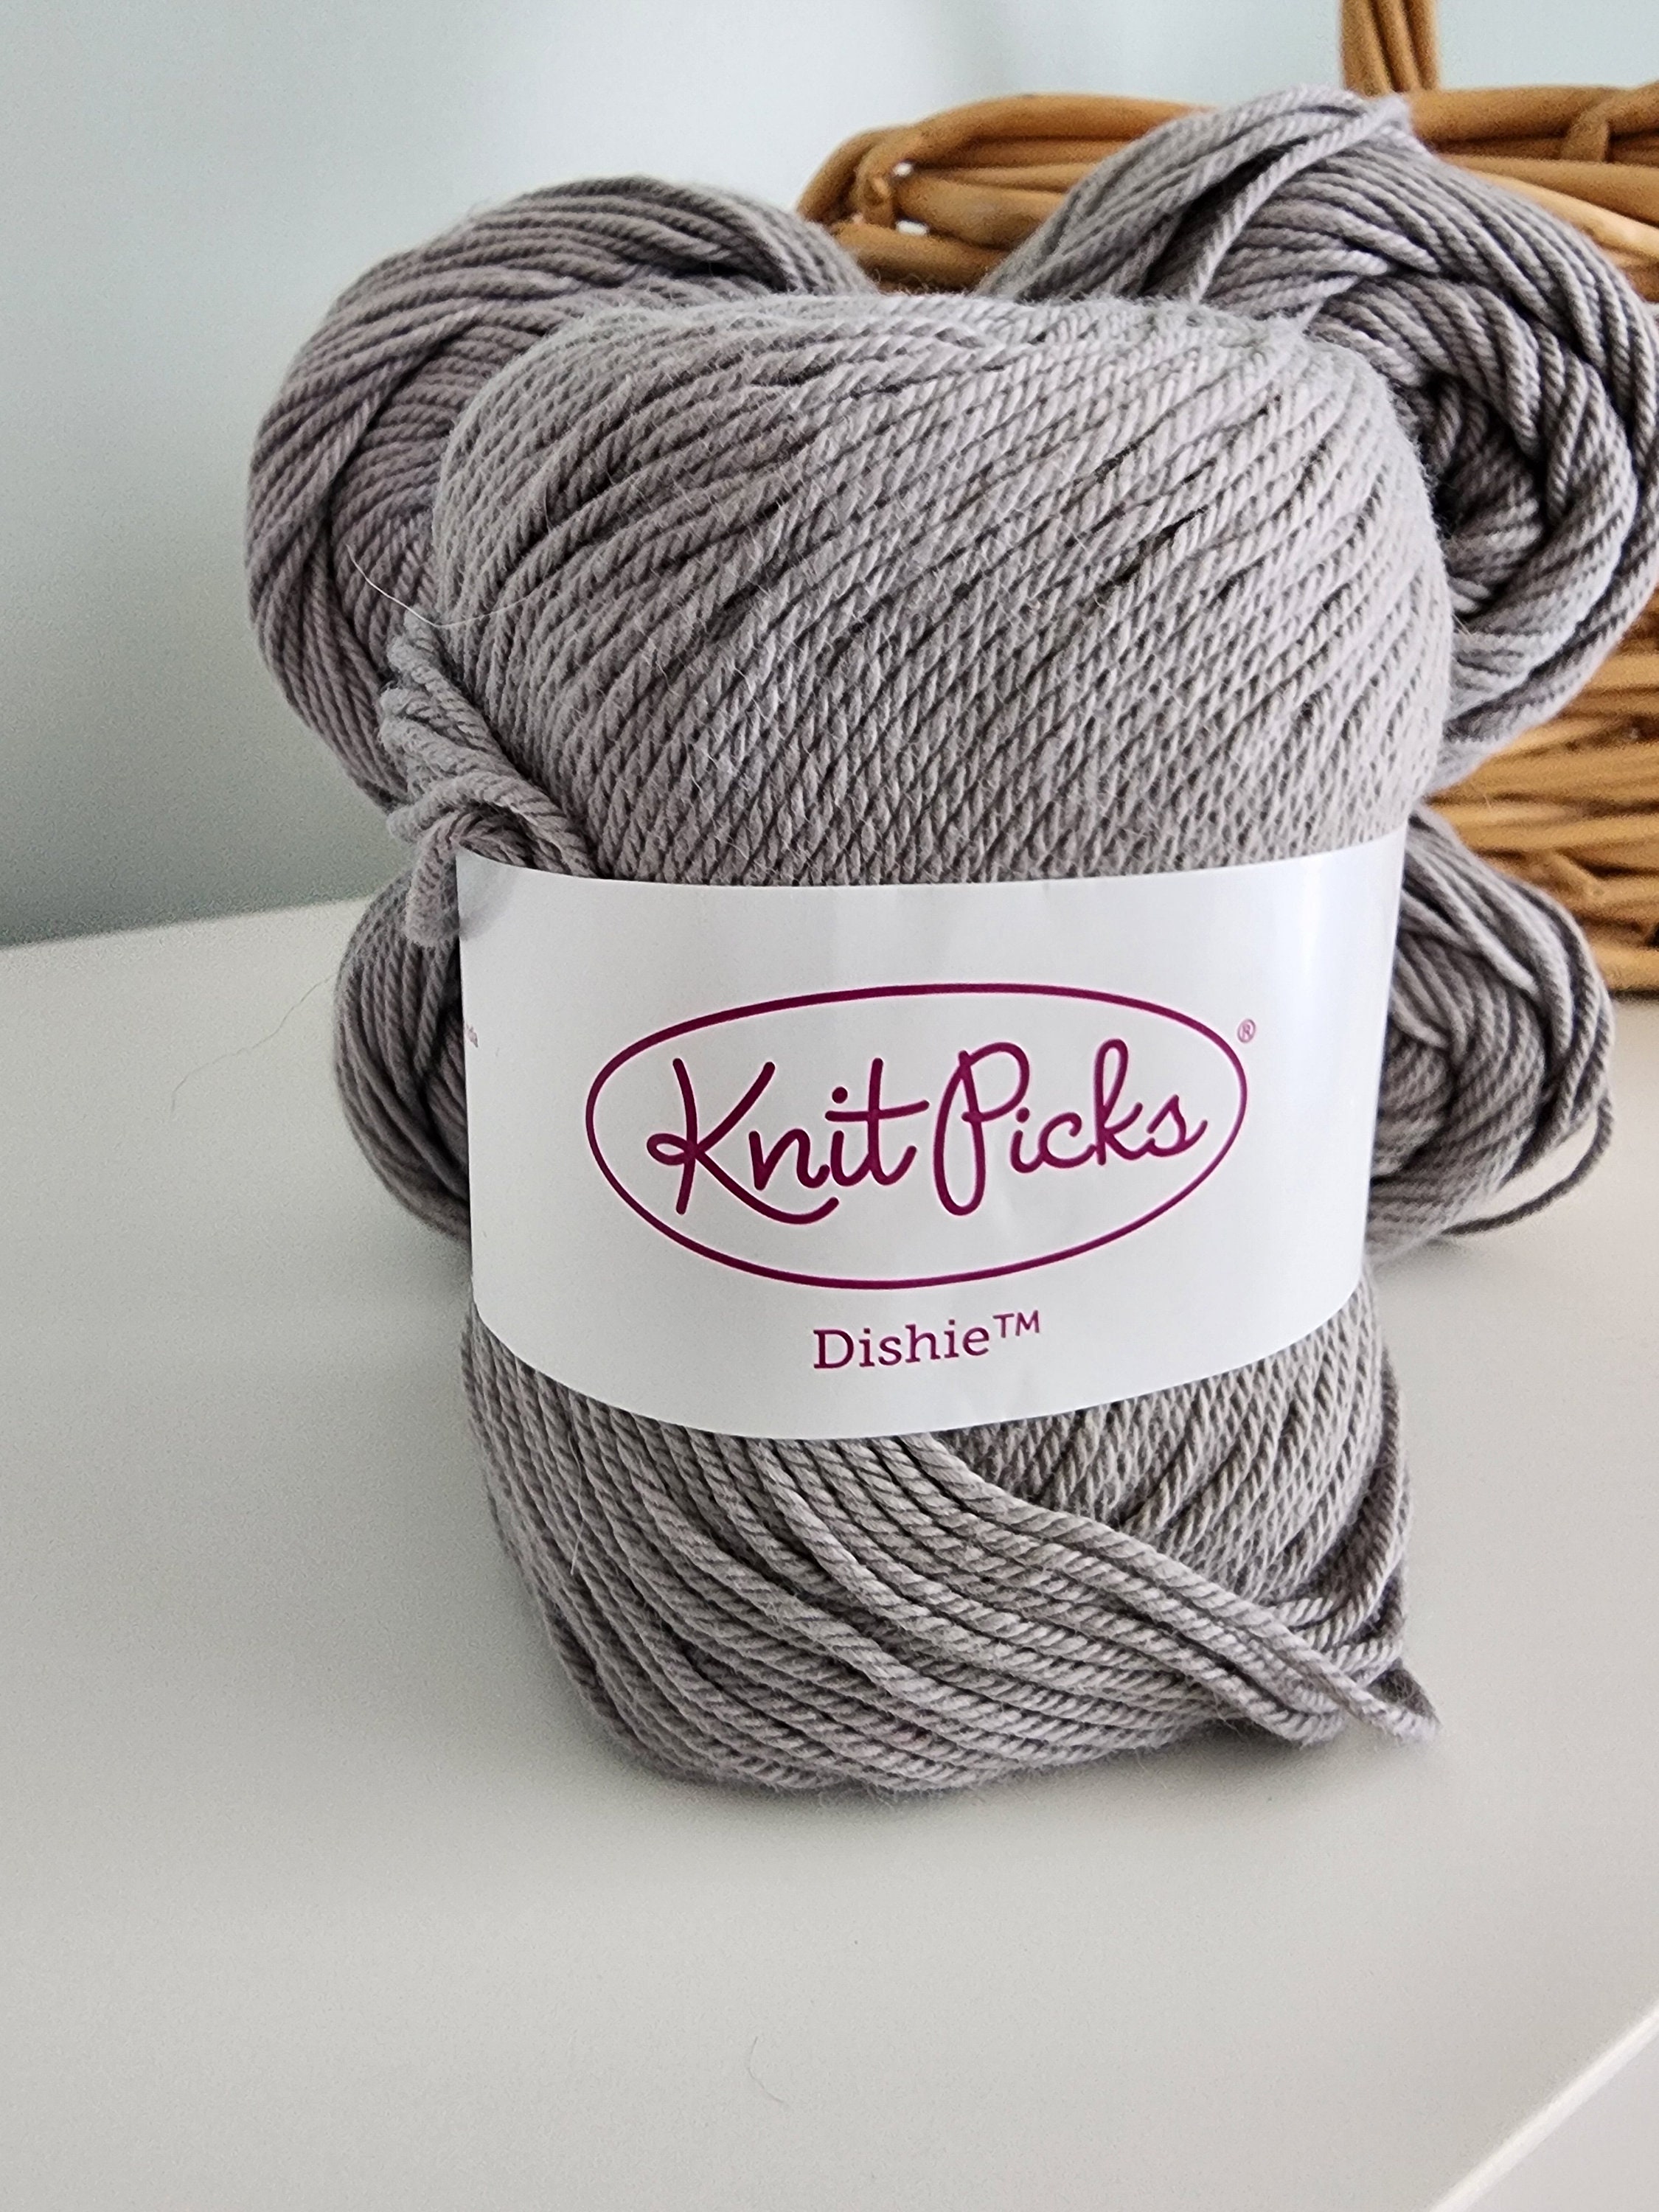  Knit Picks Dishie Worsted Weight 100% Cotton Yarn